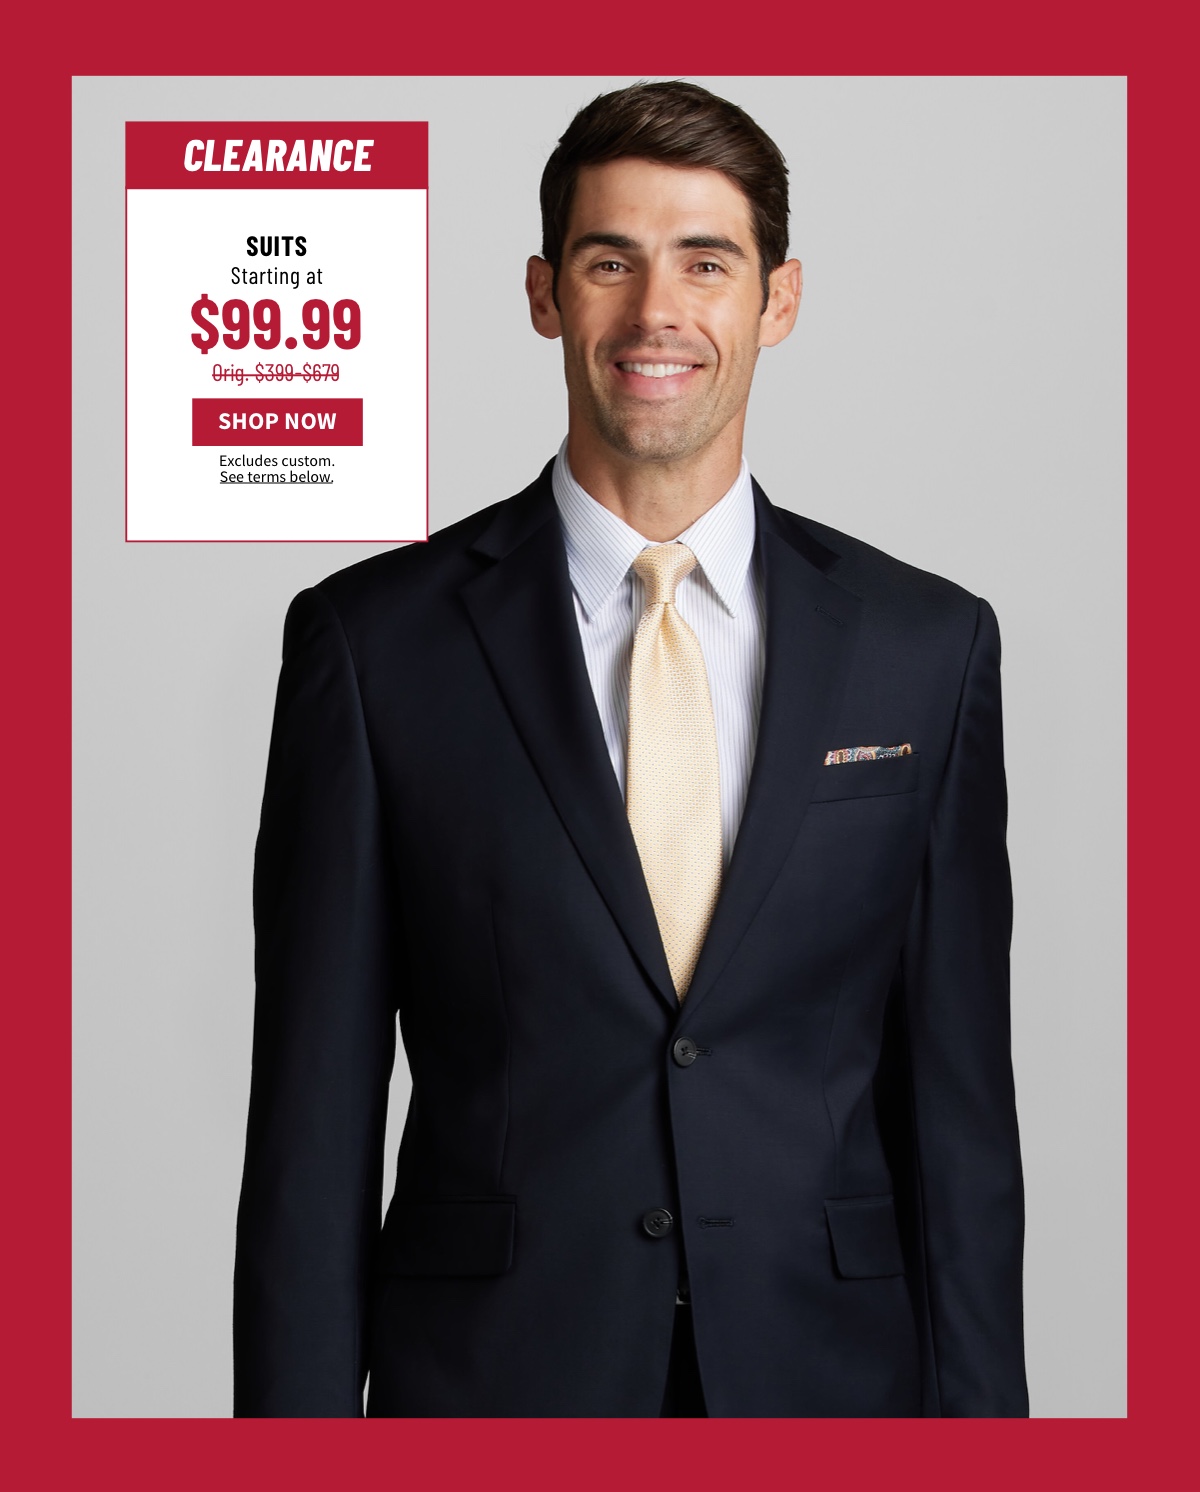 Clearance Suits Starting at $99.99 Orig. $399-$679 Shop Now Excludes custom. See terms below.